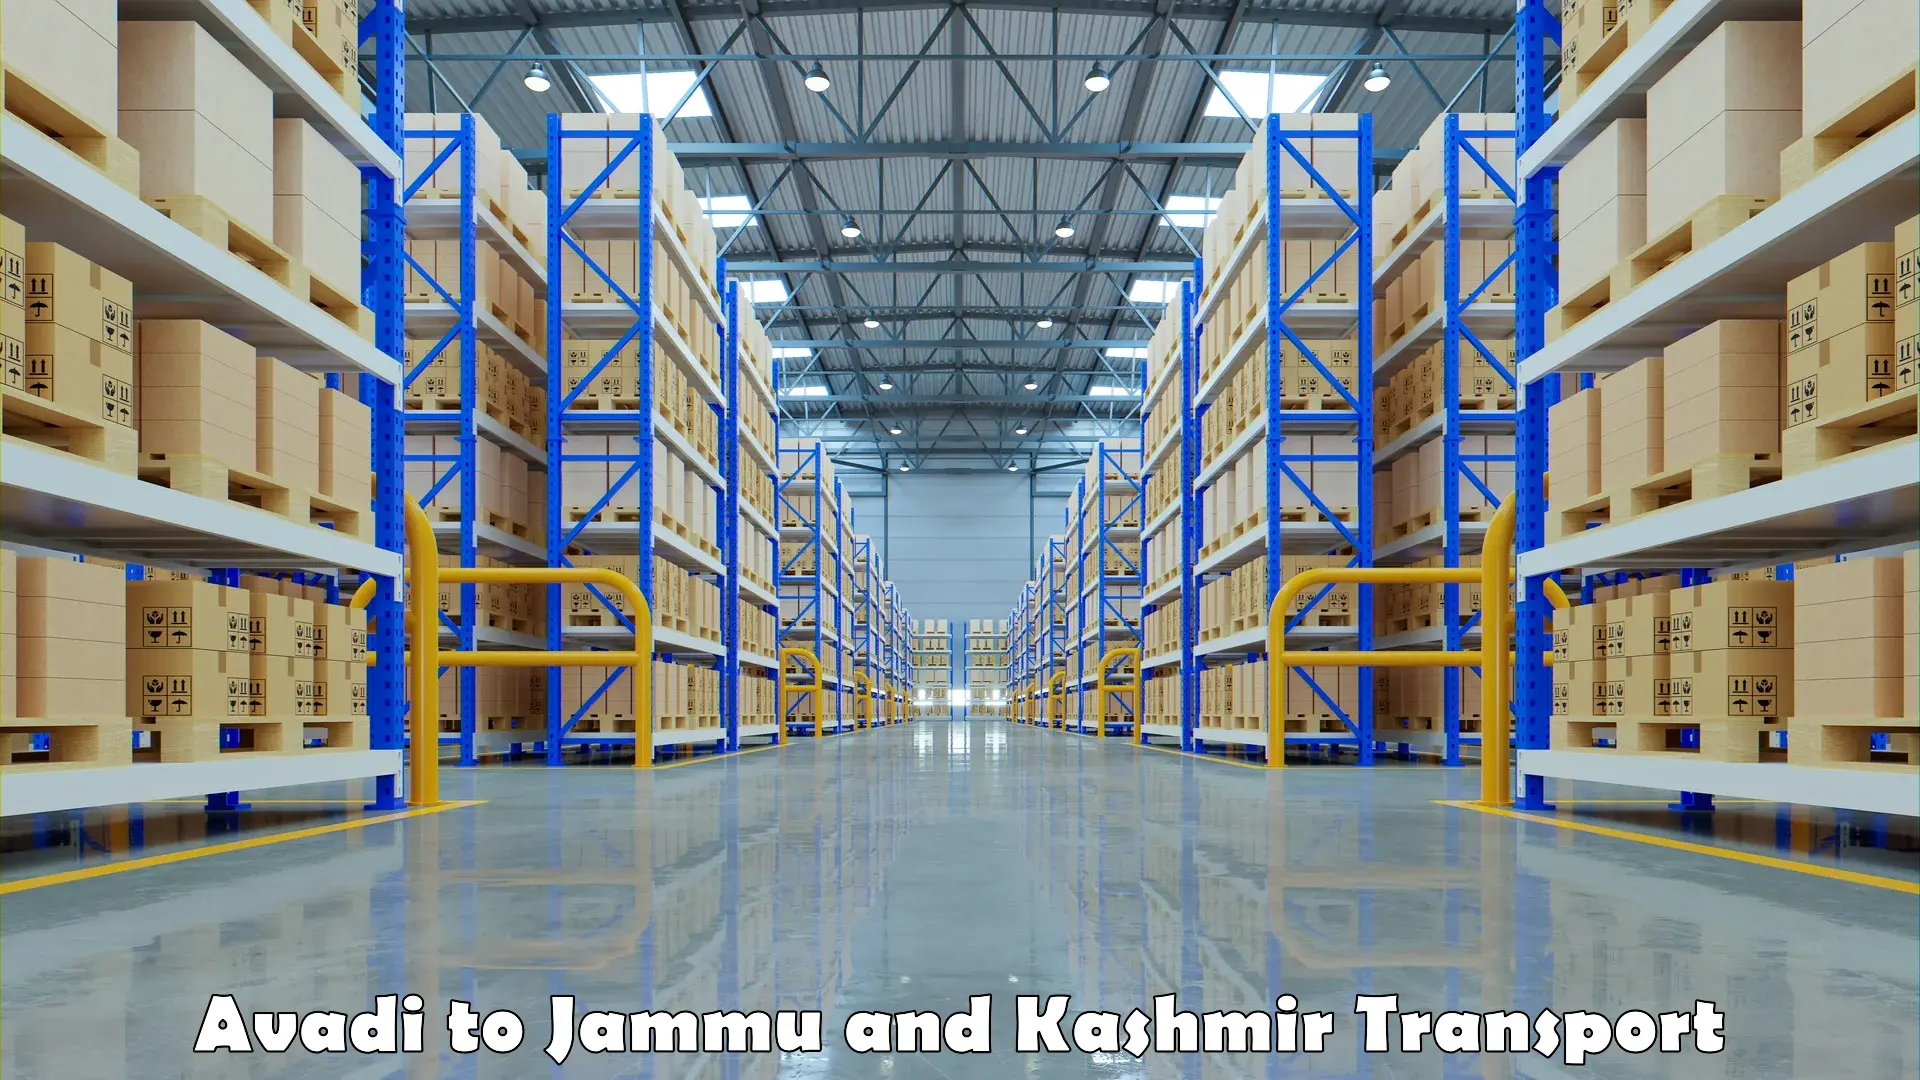 Commercial transport service Avadi to Jammu